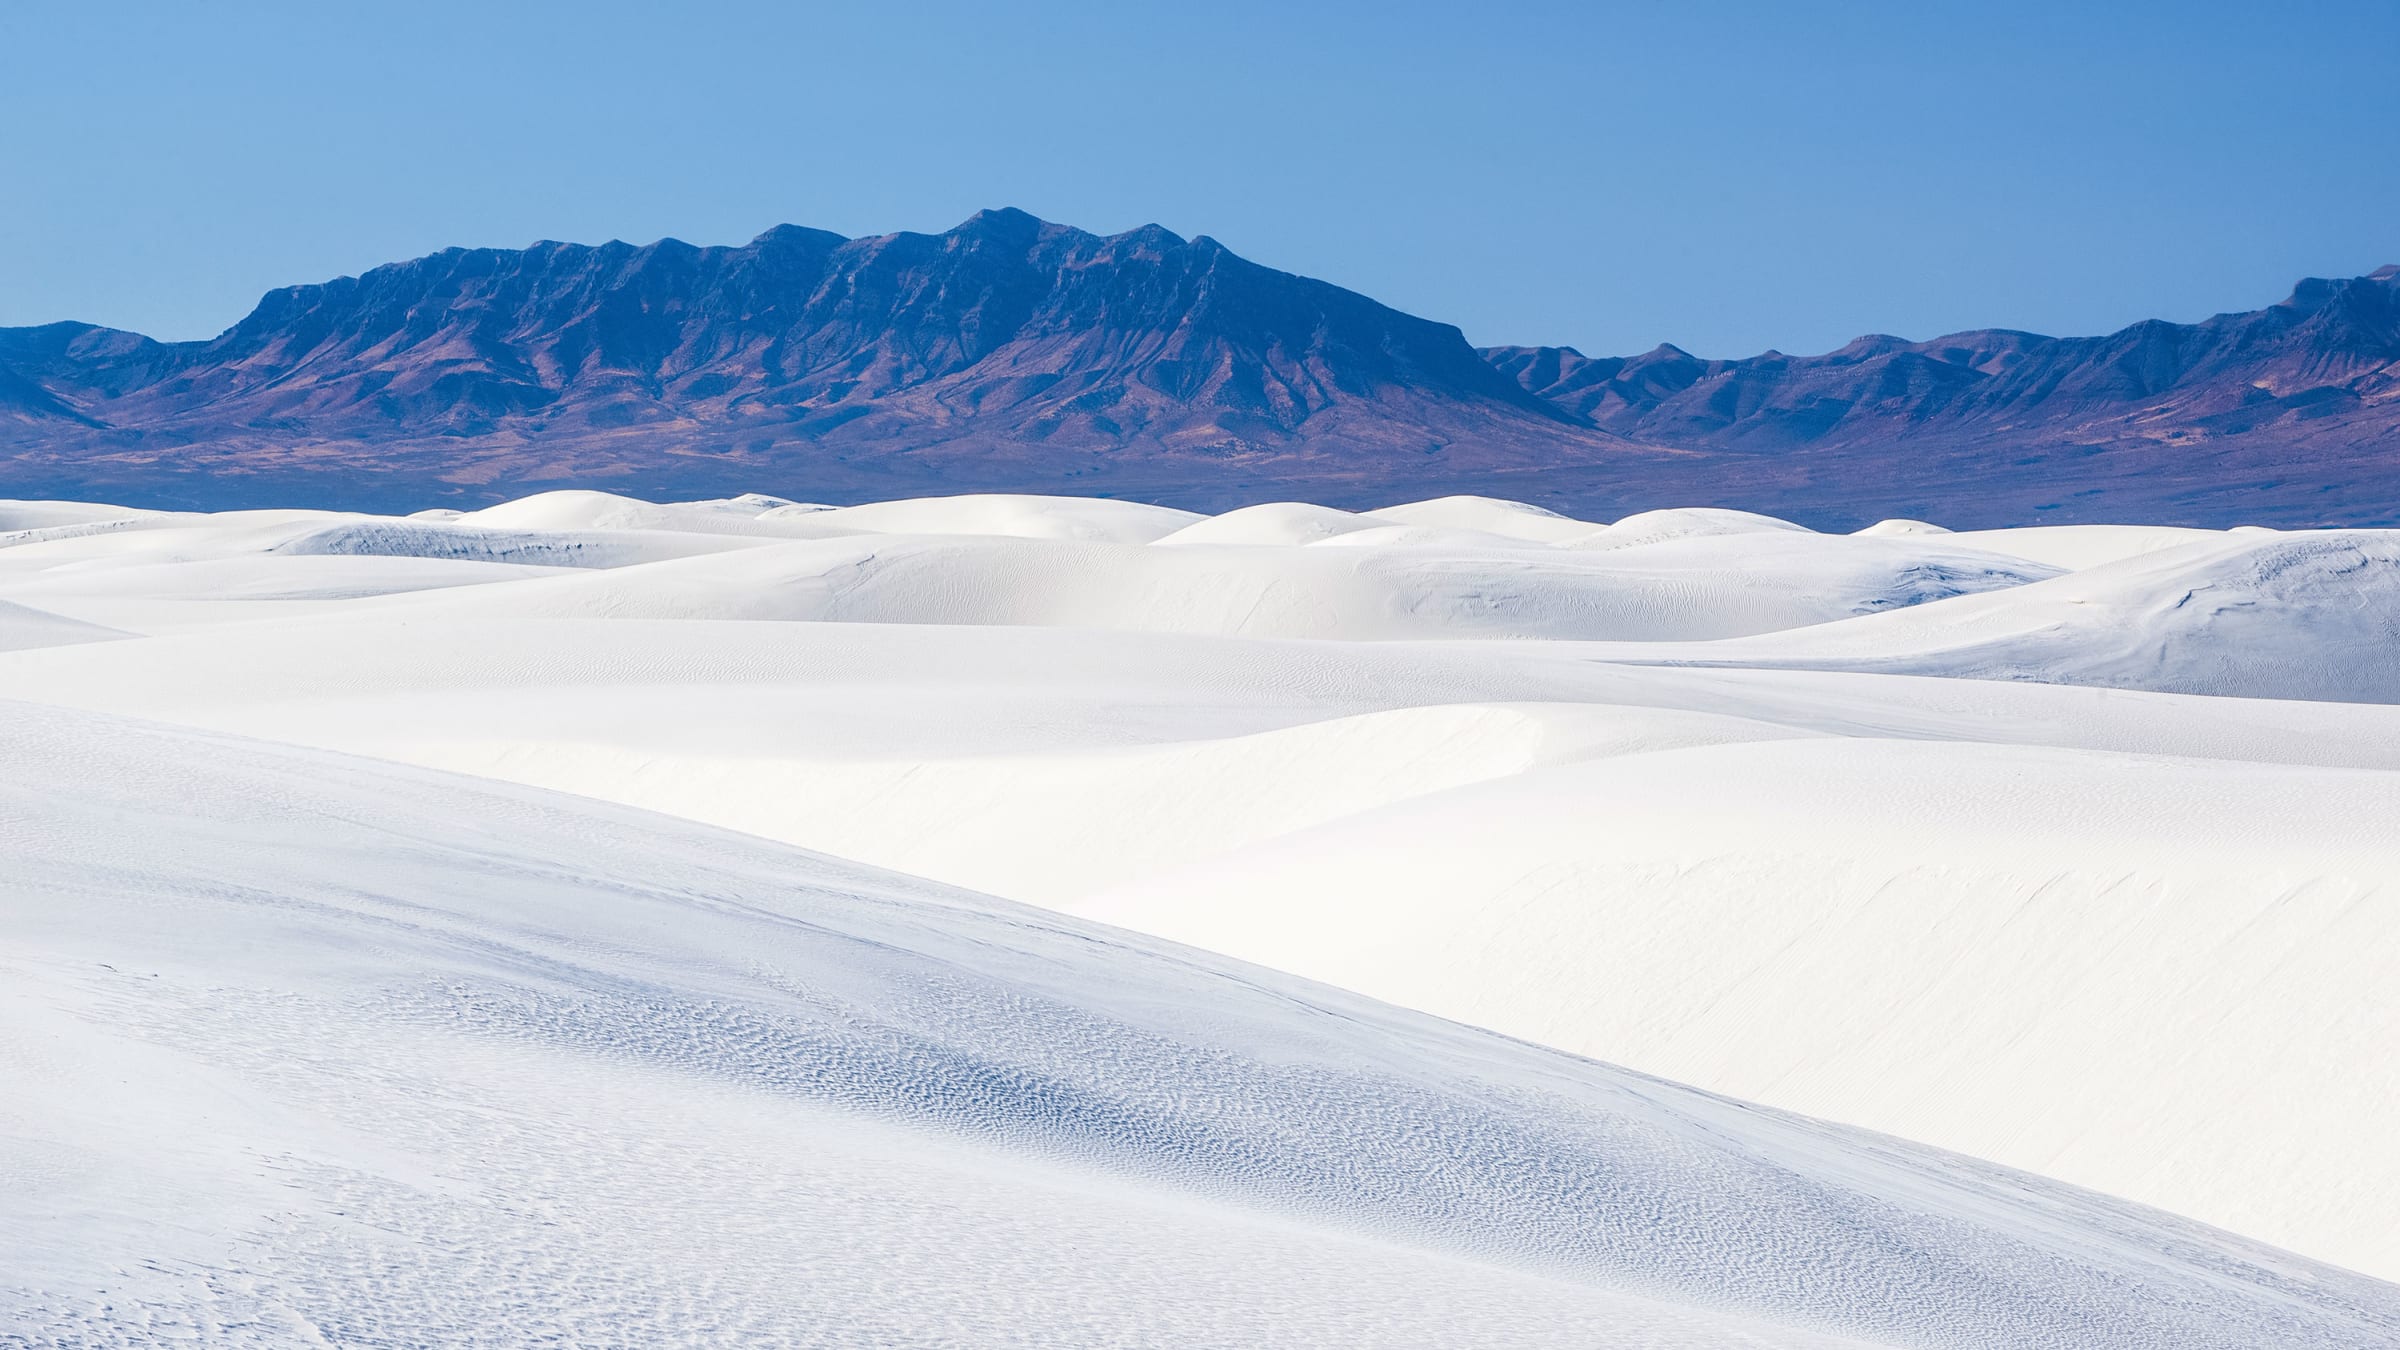 White Sands National Monument Brad Pitt Inspired Me to Camp Here for My Birthday